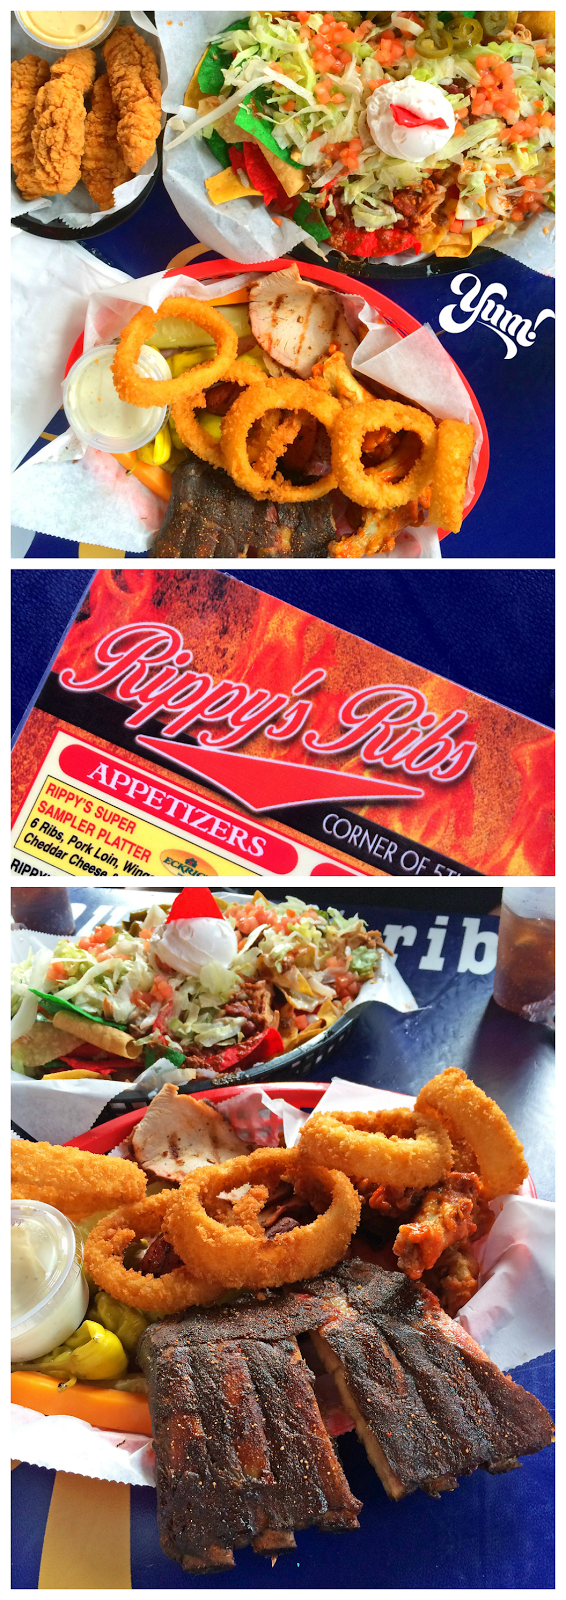 Downtown Nashville - Rippy's Bar & Grill